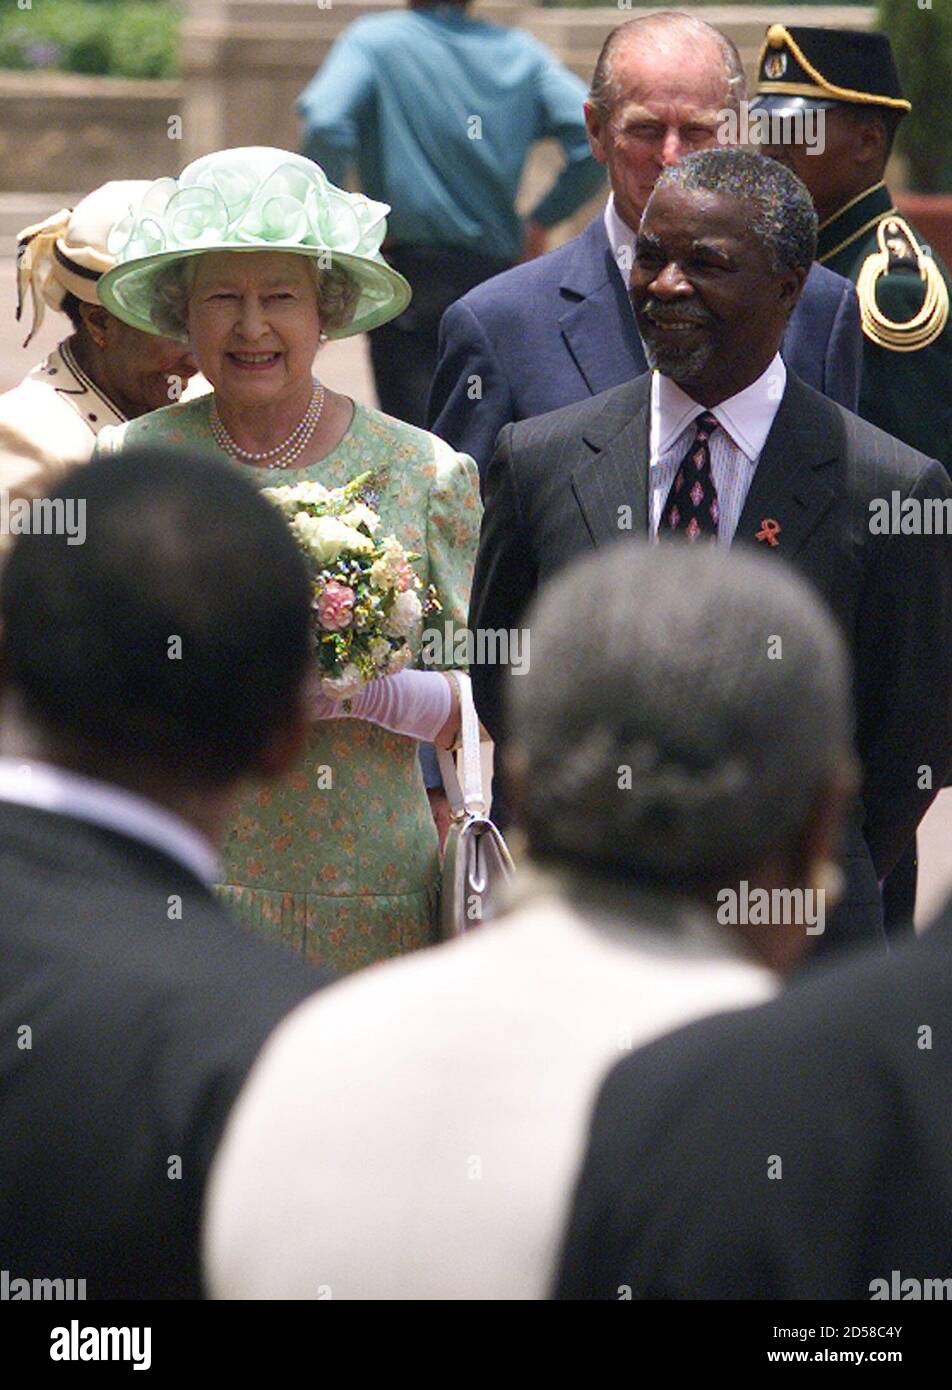 South African President Thabo Mbeki welcomes Britain's Queen Elizabeth to South Africa at the beginning of her state visit 10 November. Queen Elizabeth is expected to express Britain's regret over the Anglo-Boer War in which it seized the Transvaal and Orange Free State from Boer settlers. Behind the monarch and President Mbeki is her husband, Prince Philip (R) and South African First Lady, Zanele Mbeki.  JN/FMS Stock Photo